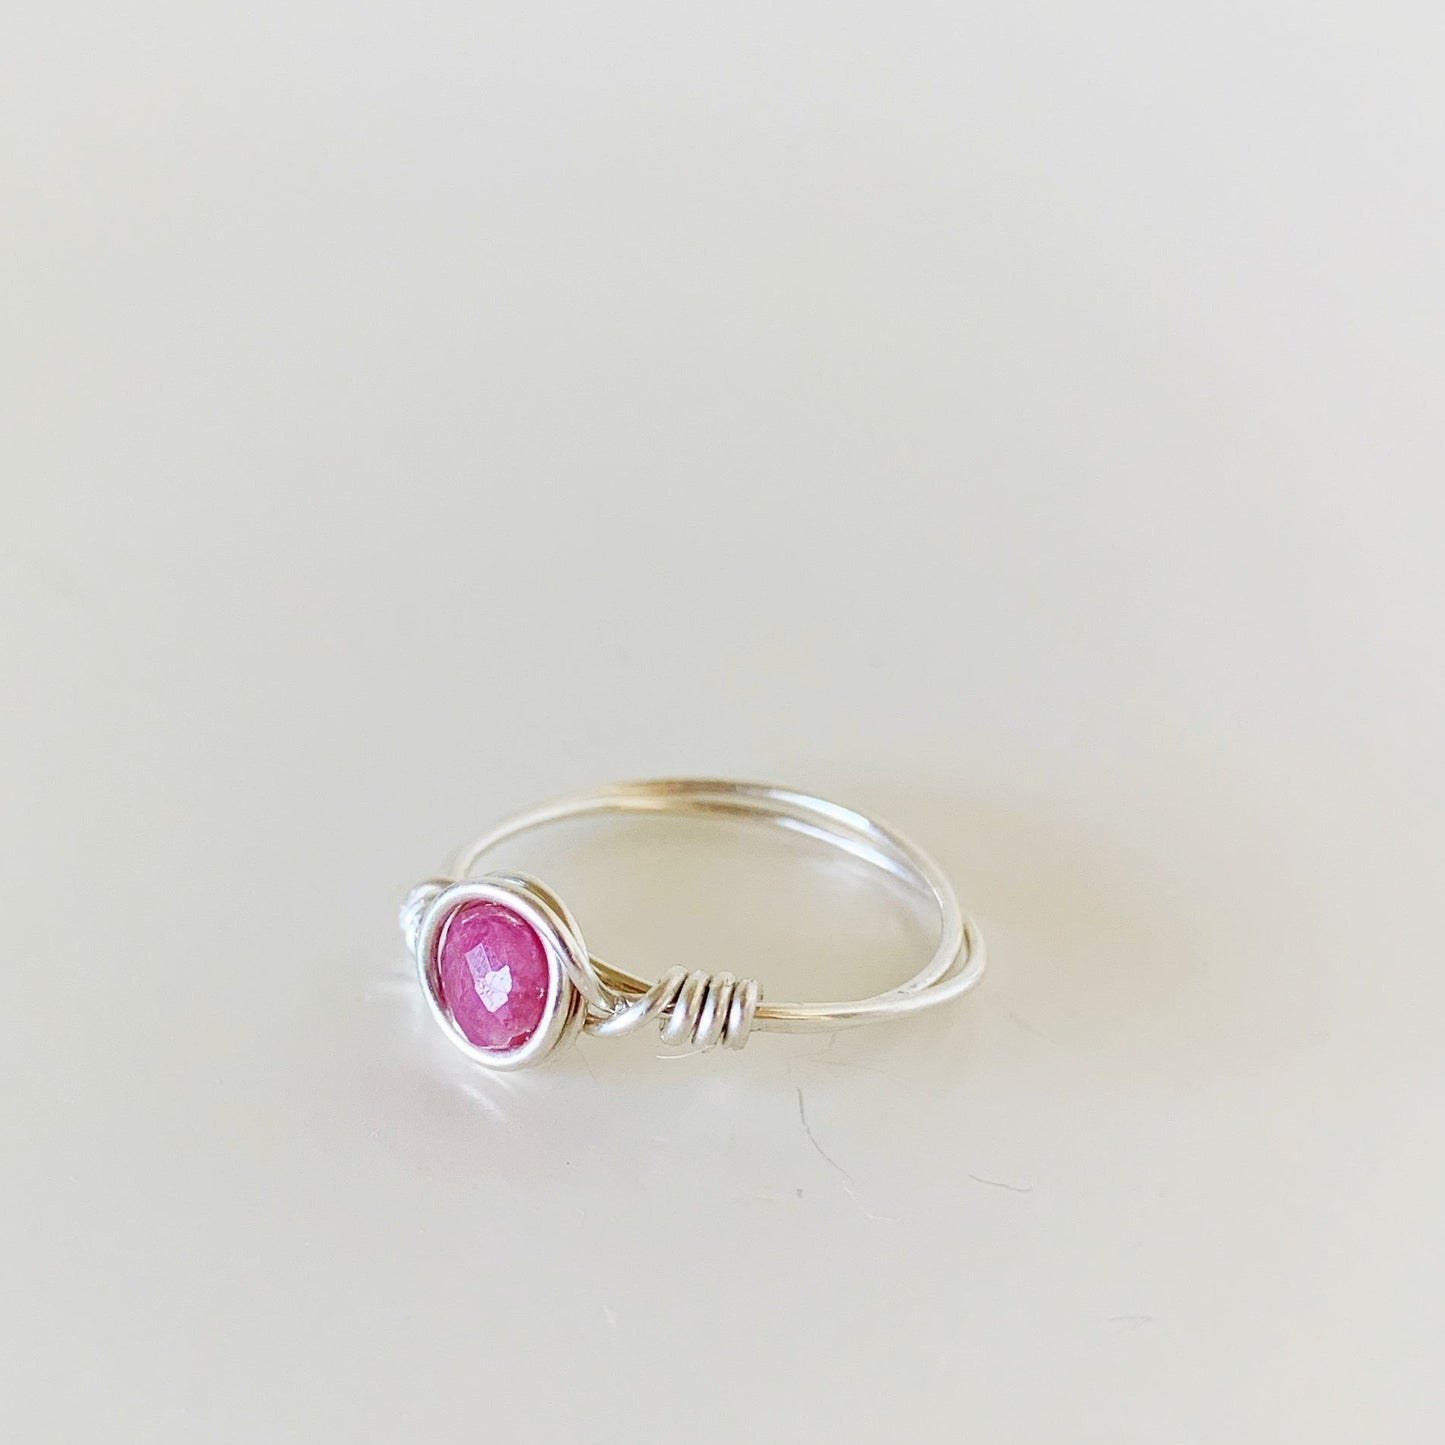 the harwich port ring by mermaids and madeleines is a wire wrapped ring created with sterling silver and has a pink tourmaline faceted coin bead at the center. this ring is facing to the left and photographed on a white surface